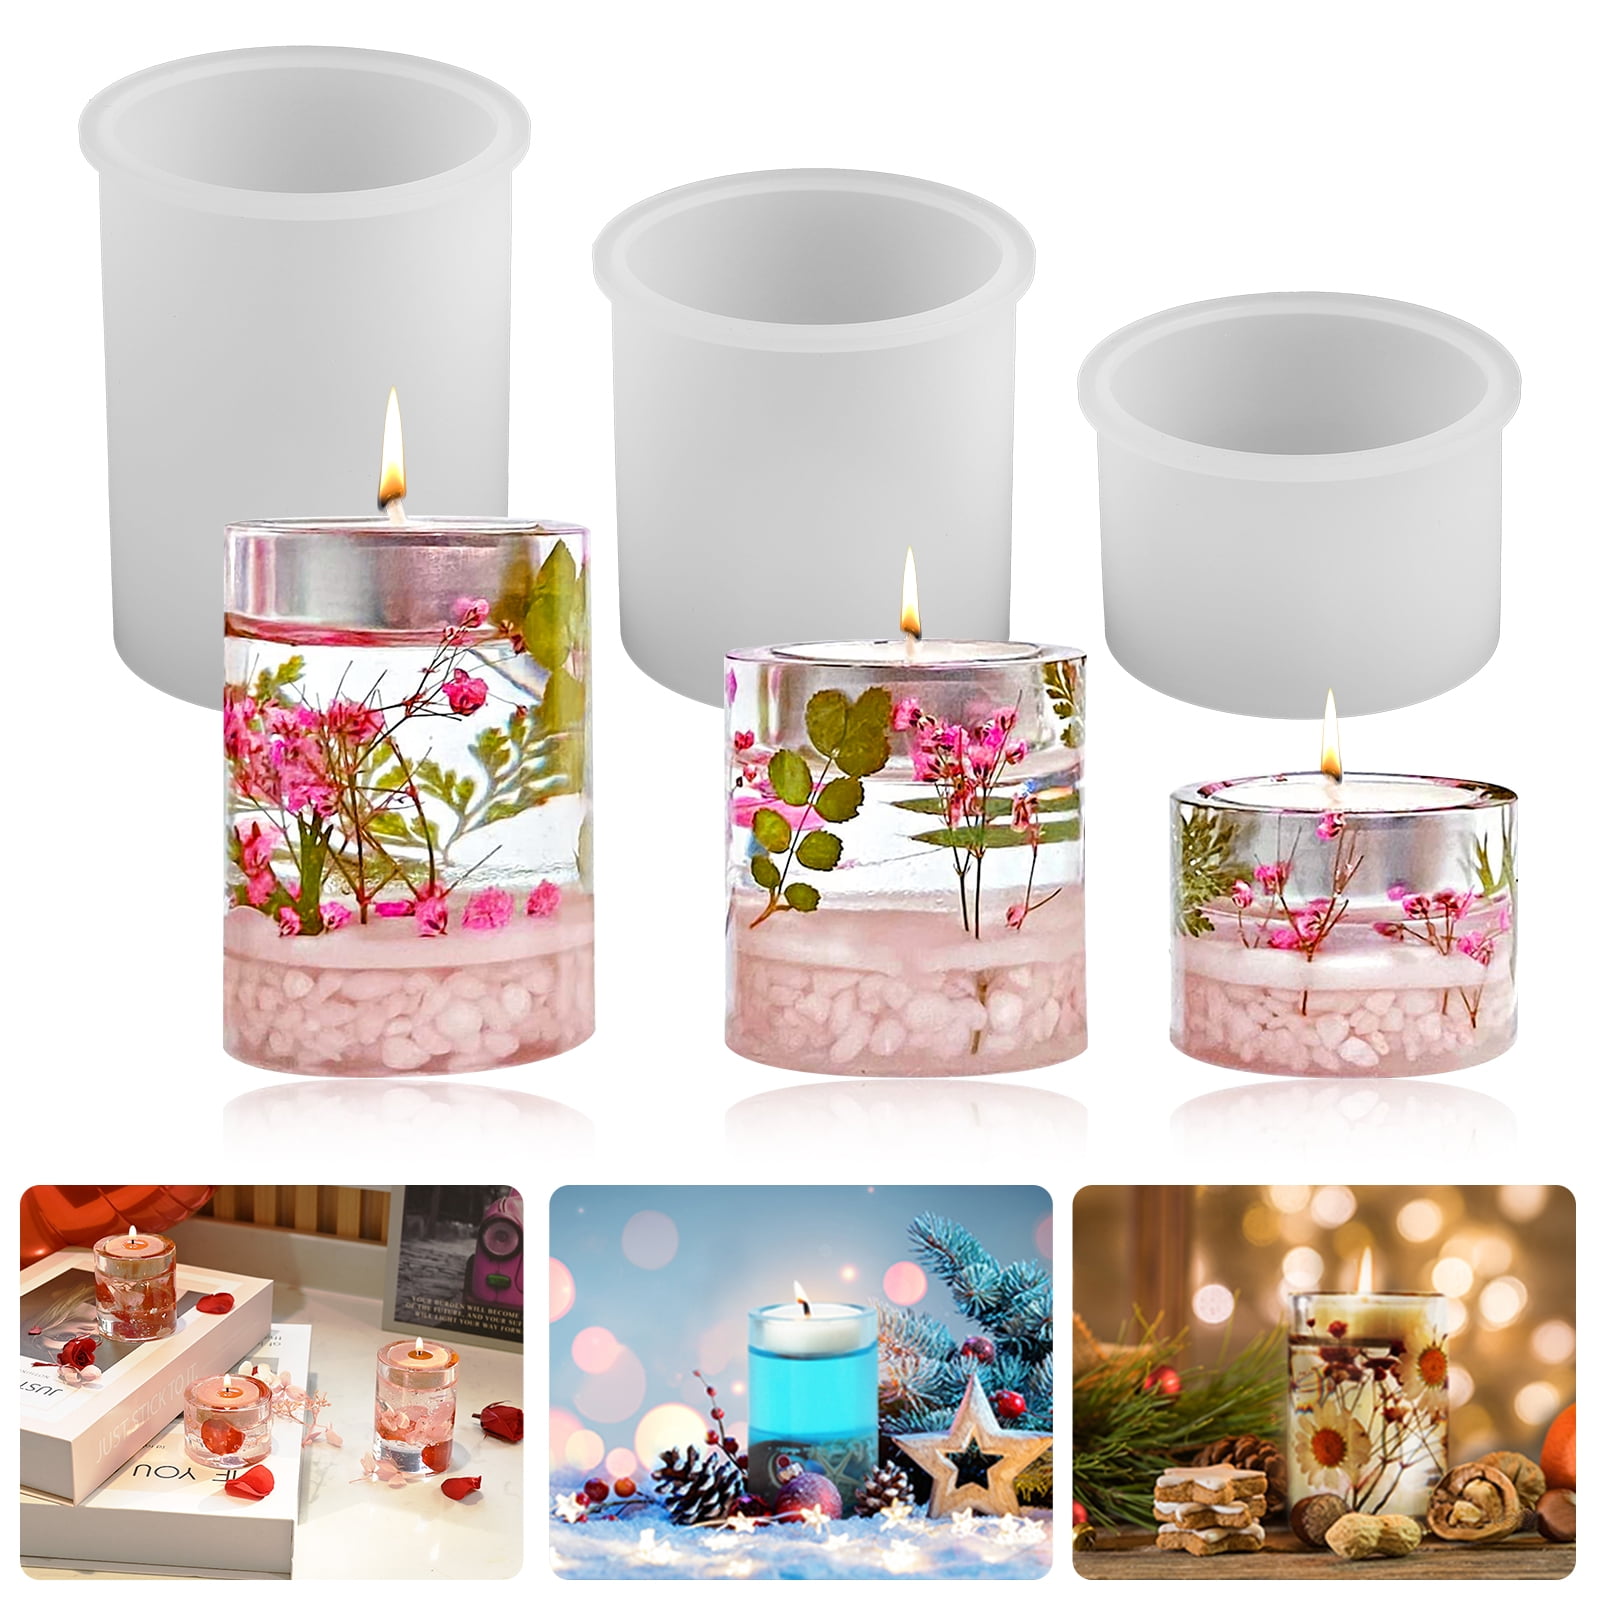 Ideal for making beautiful votive candles 4 Votive Candle Making Moulds 